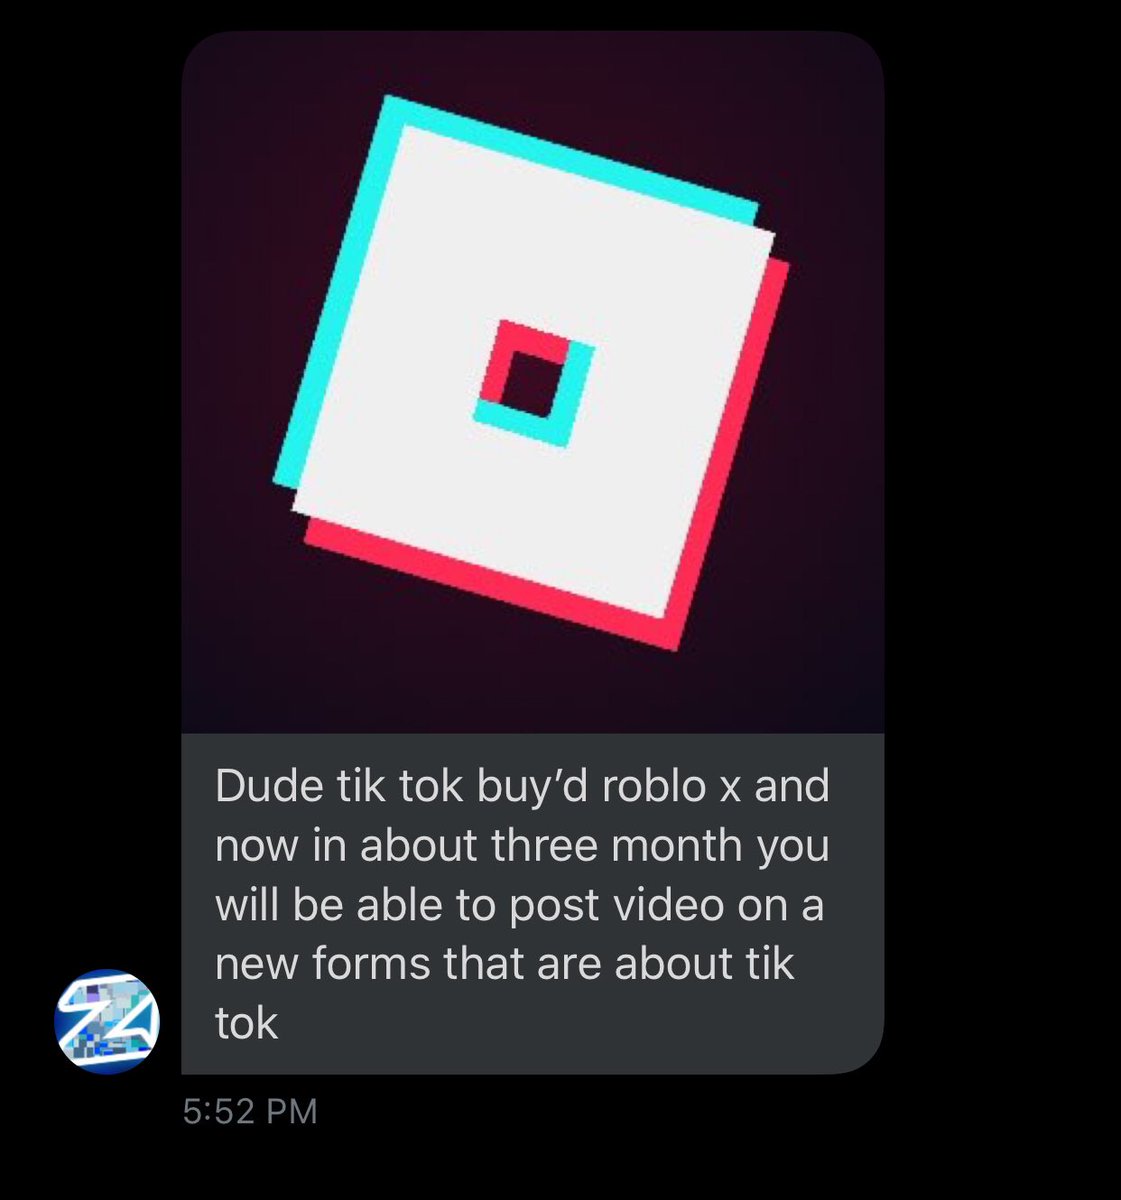 News Roblox On Twitter It Appears That Tikttok Has Bought Roblox A User Has Sent Us The New Logo And Some Extra Informatoion We Expect An Announcing From Either Roblox Or Tiktok - itsjordanroblox at itsroblox twitter